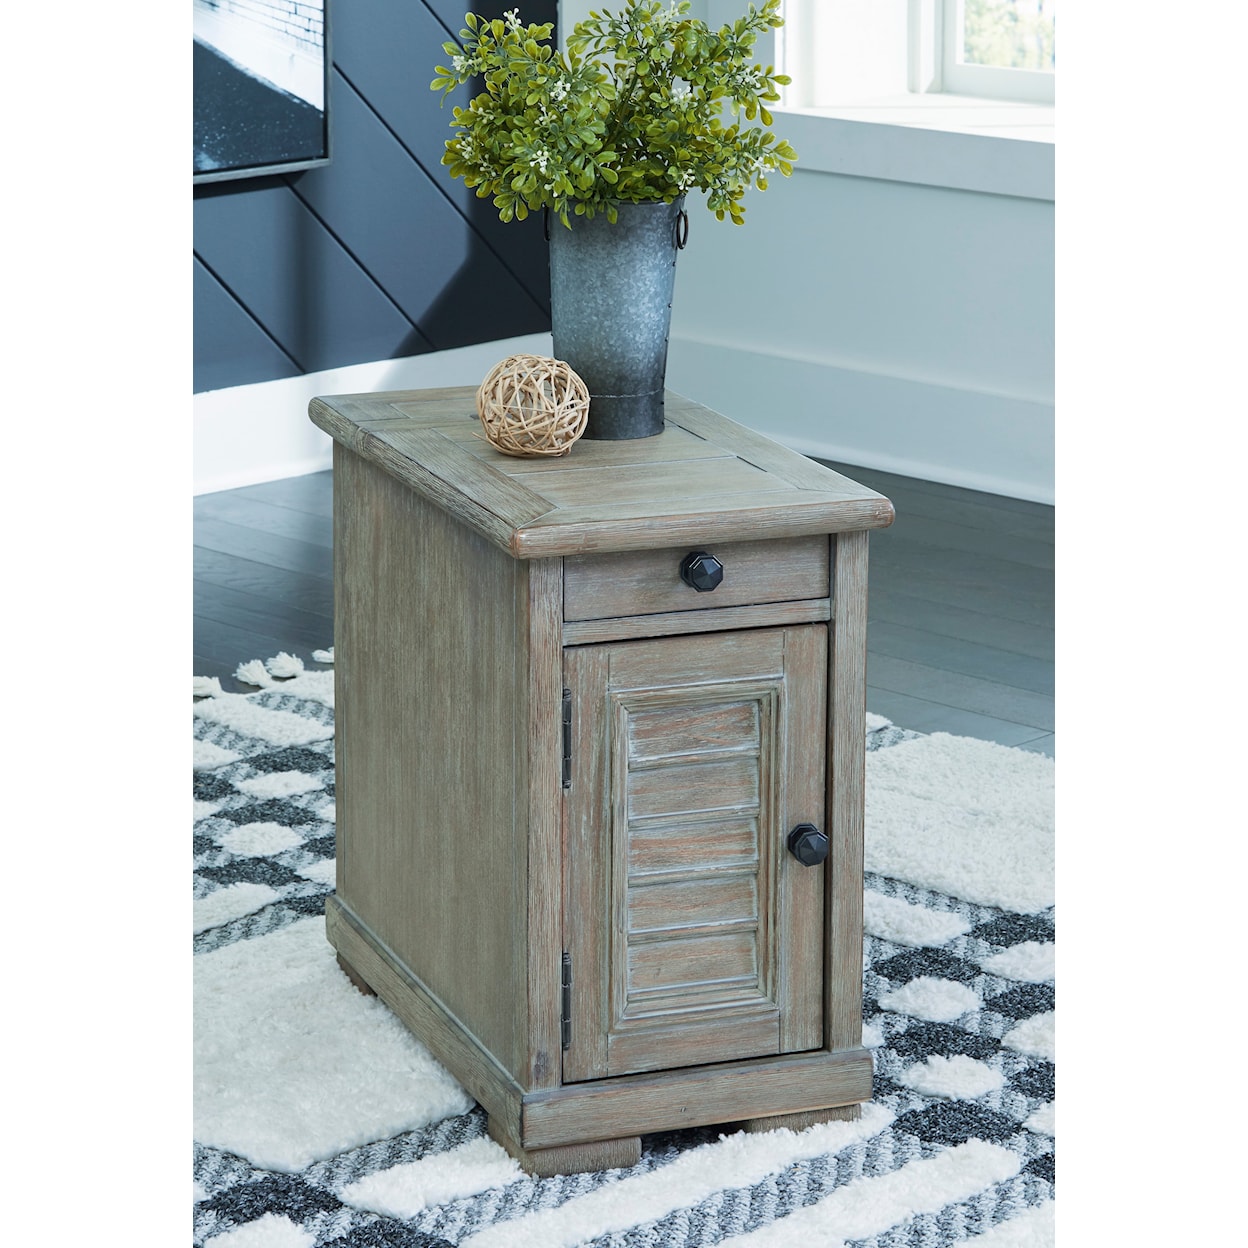 StyleLine Moreshire Chairside End Table